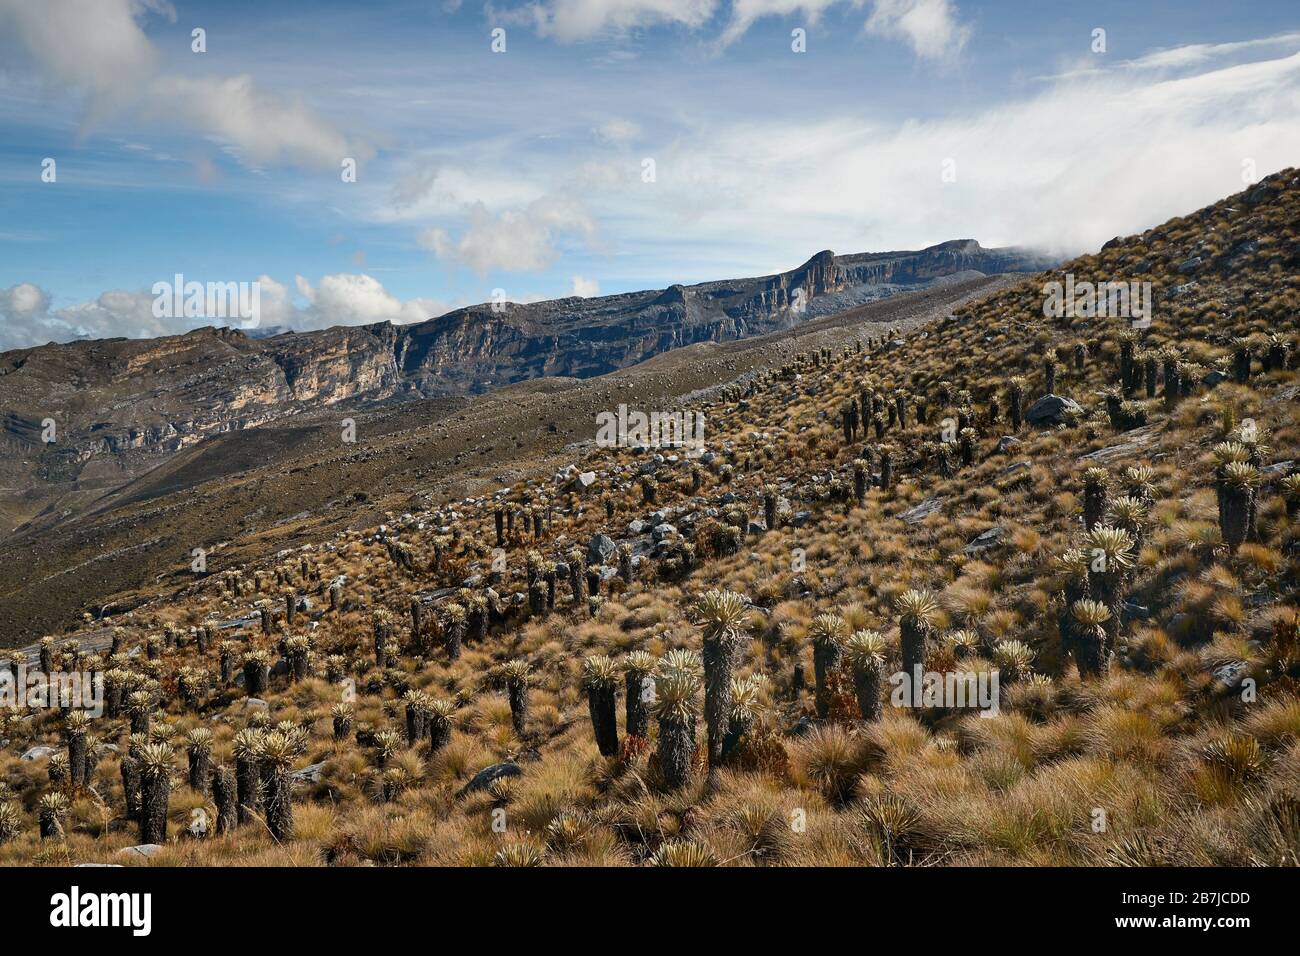 Mountain landscape in the Andes Stock Photo